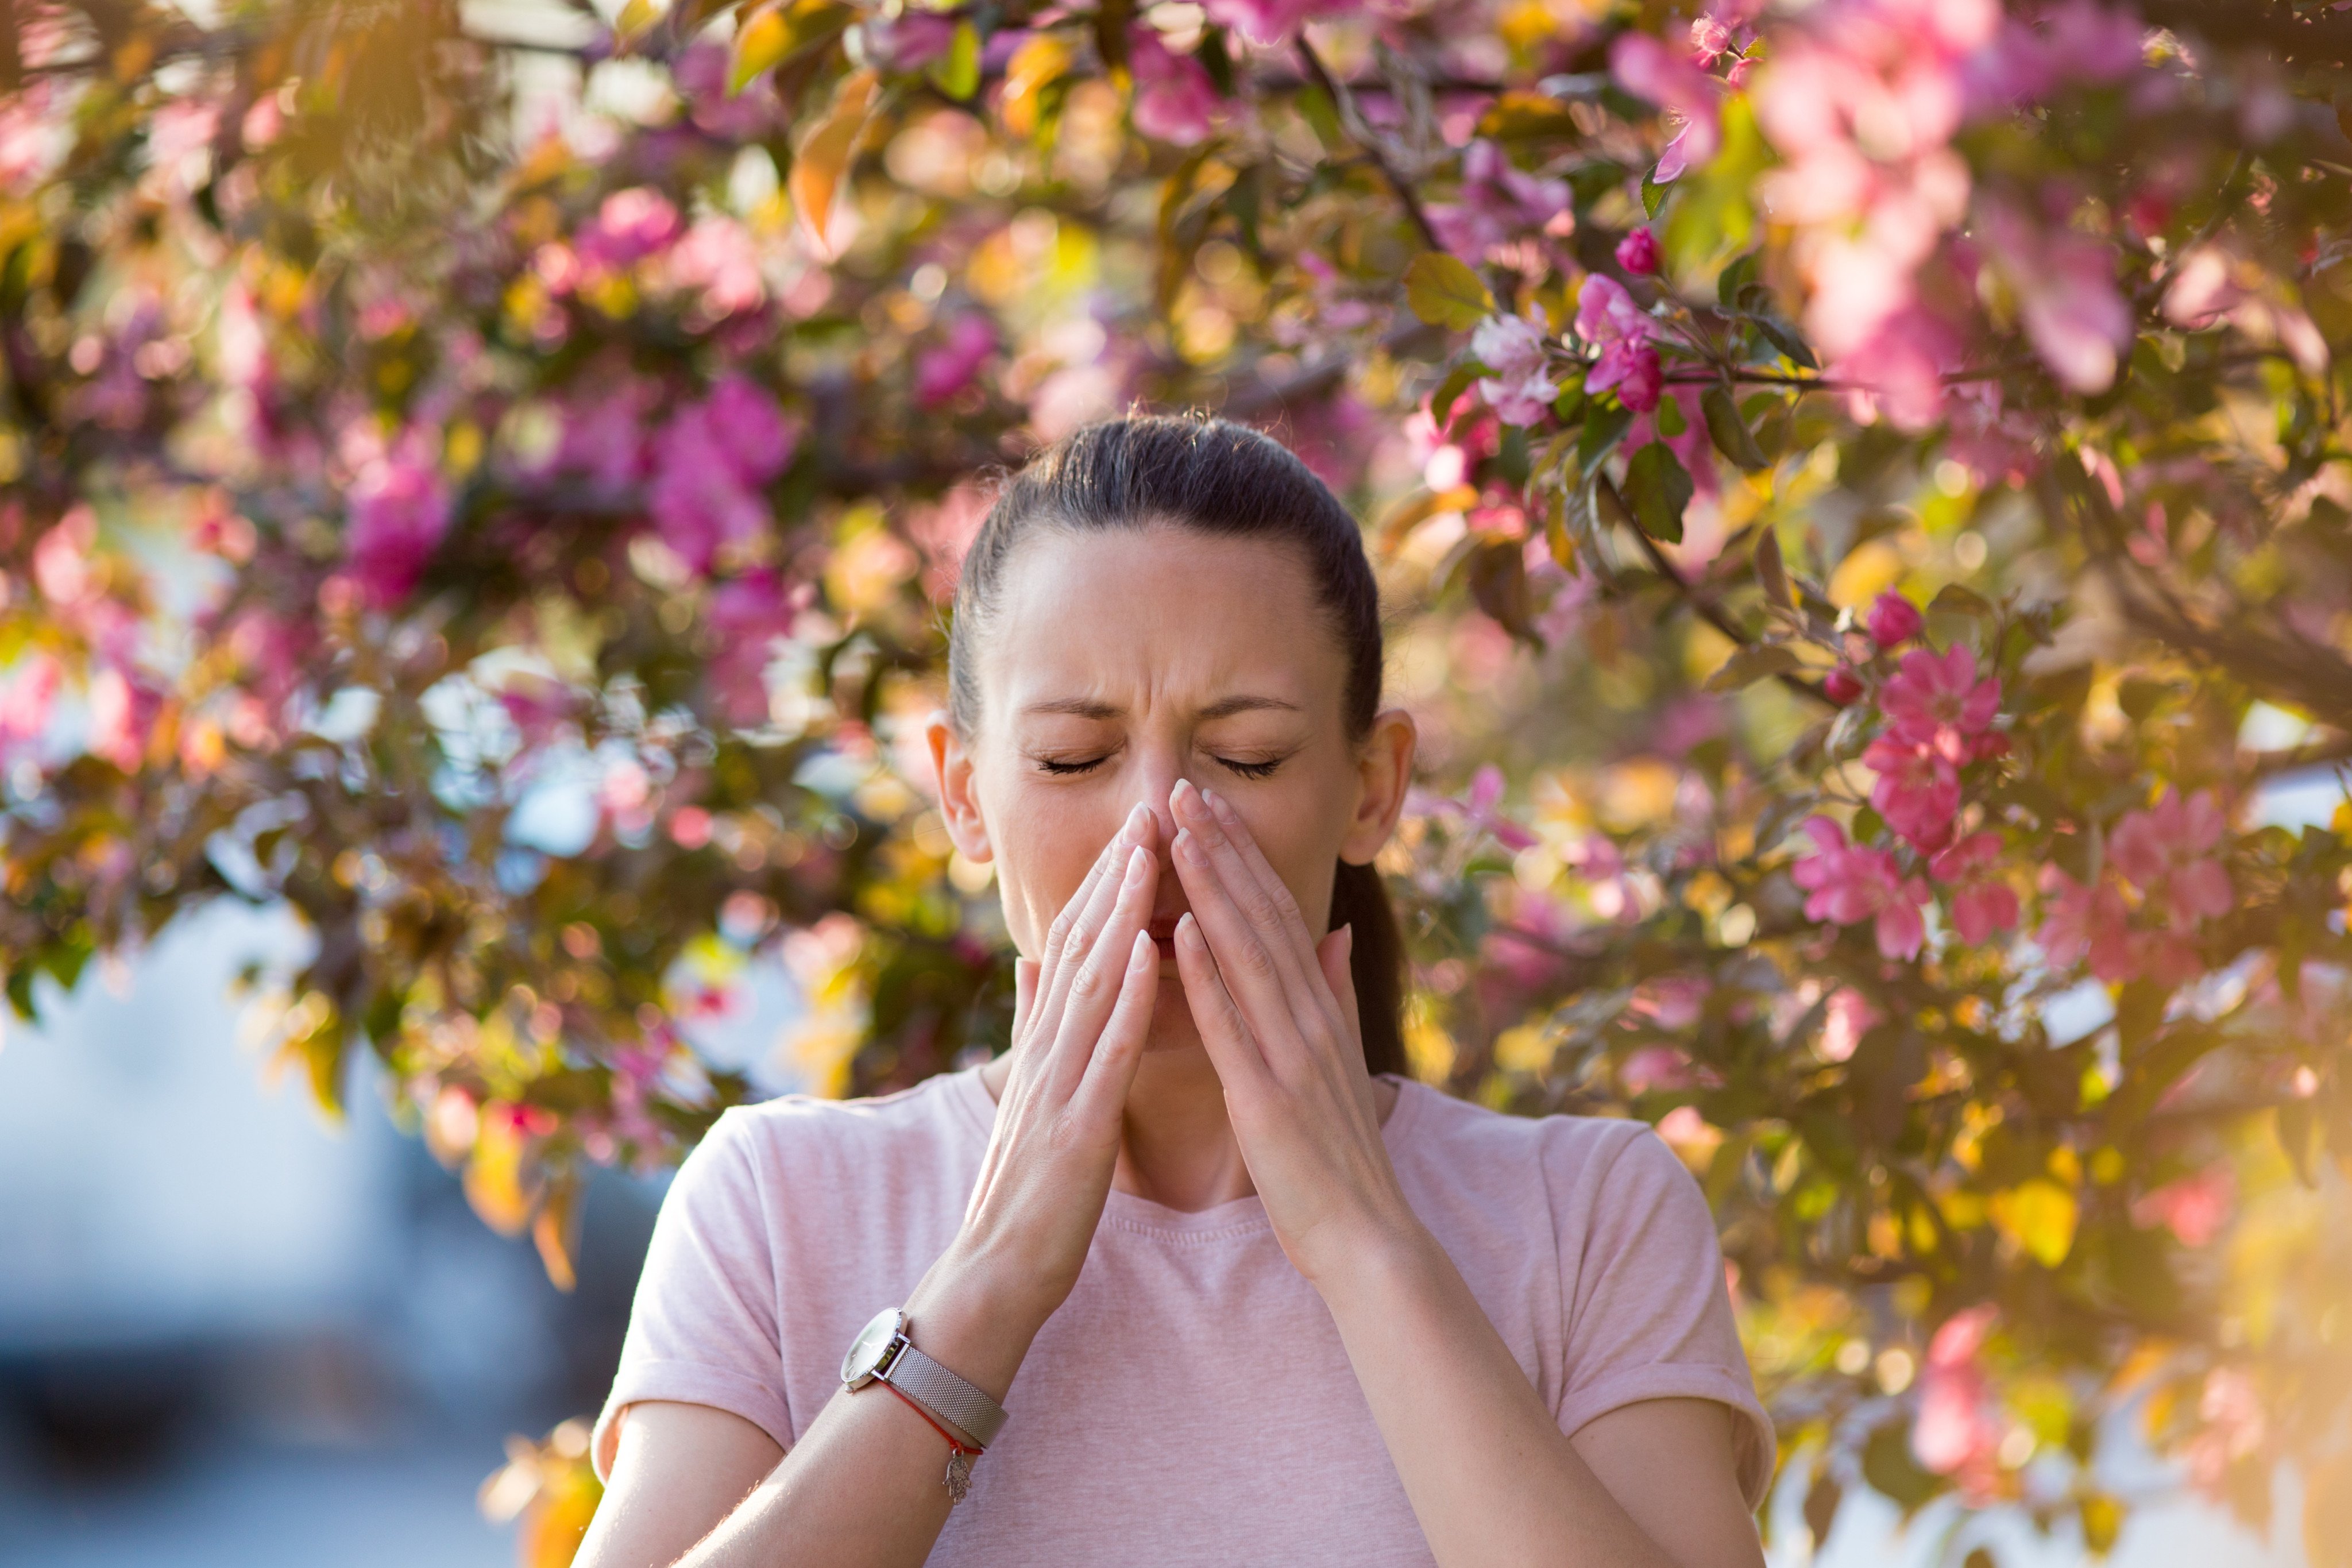 In many parts of the world, spring is the start of pollen season, which triggers allergies. An allergy specialist in Hong Kong describes the allergy situation in the city in this brief explainer – what causes them, allergy symptoms, how to treat allergies and how to avoid them. Photo: Shutterstock